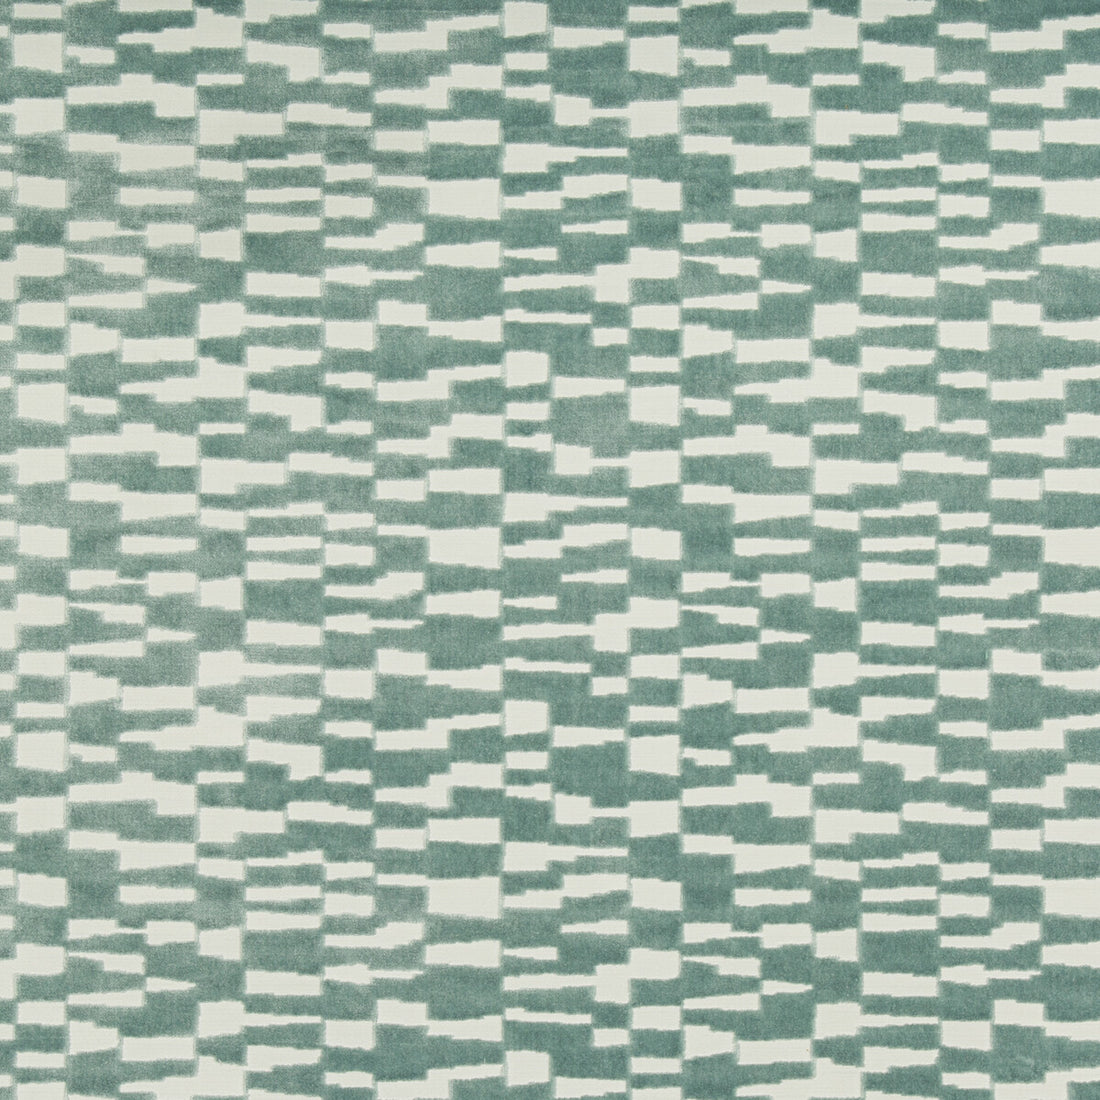 Mod Velvet fabric in spa color - pattern 35544.23.0 - by Kravet Basics in the Bermuda collection